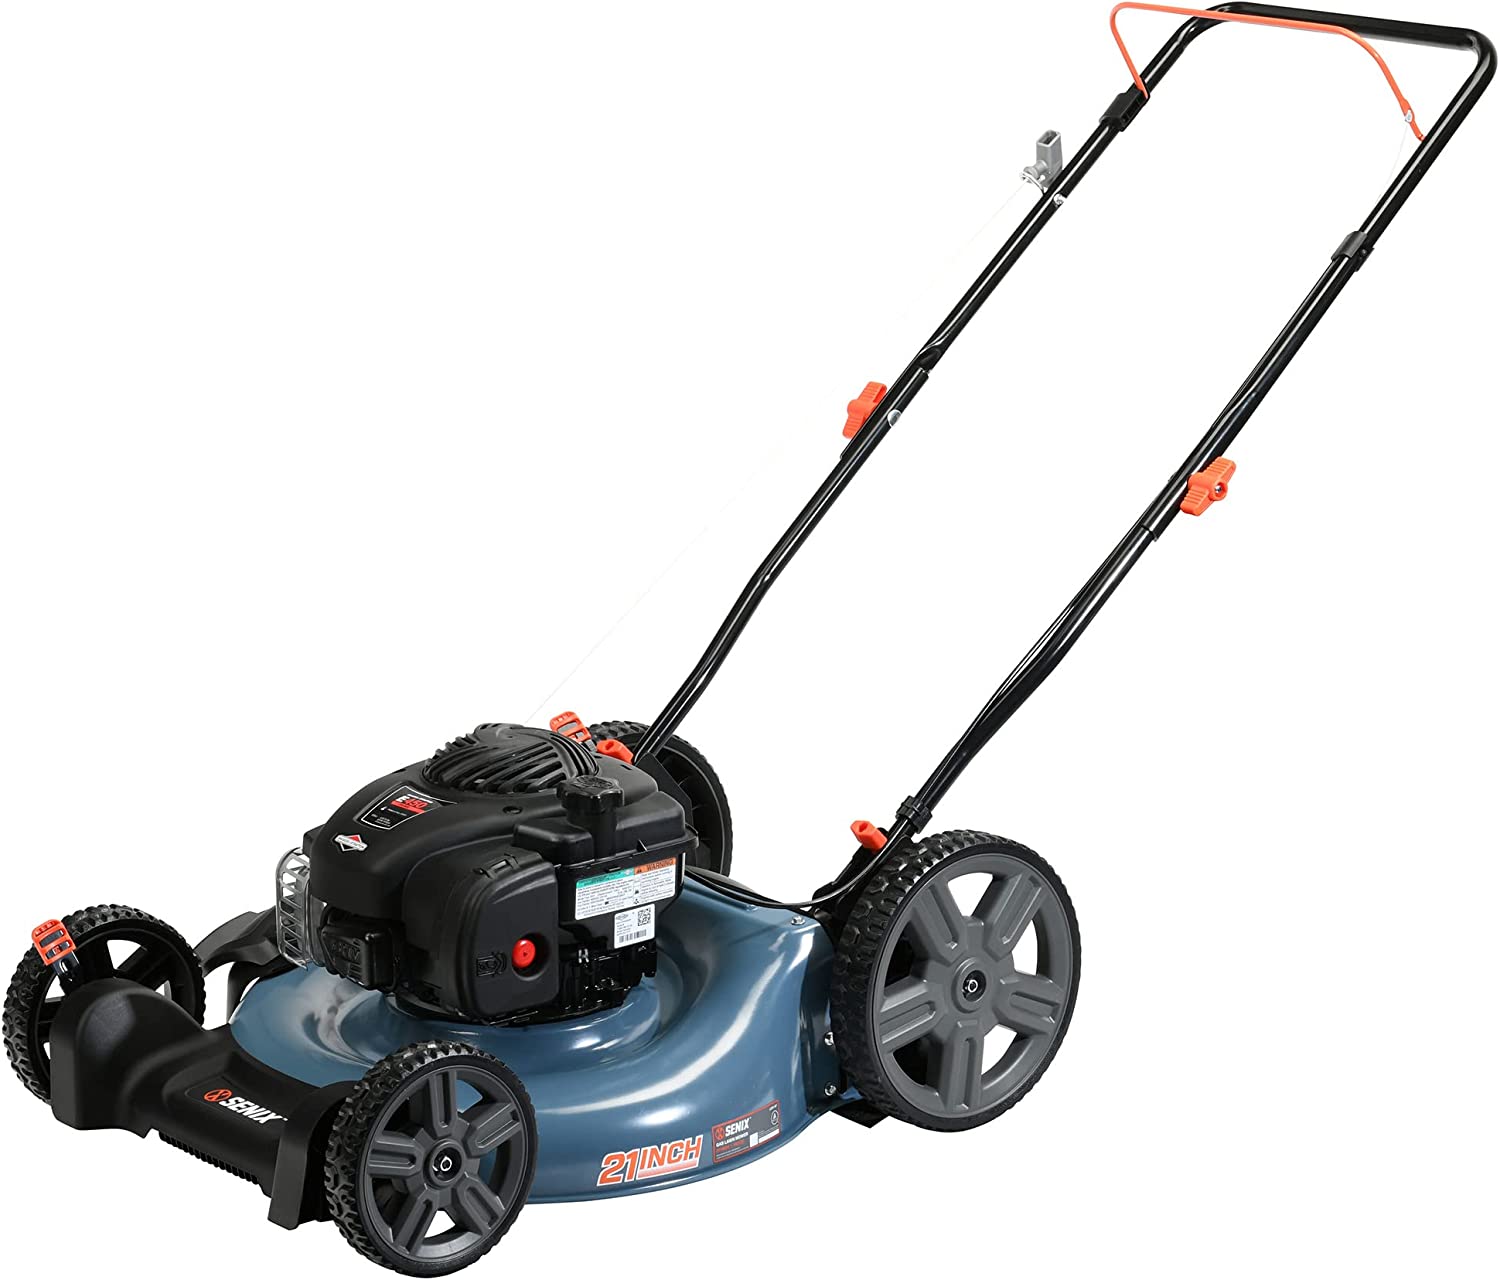 SENIX Gas Lawn Mower， 21-Inch， 140 cc 4-Cycle Briggs and Stratton Engine， 2-in-1 Push Lawnmower， 6-Position Height Adjustment with 11-Inch Rear Wheels， LSPG-M6， Blue